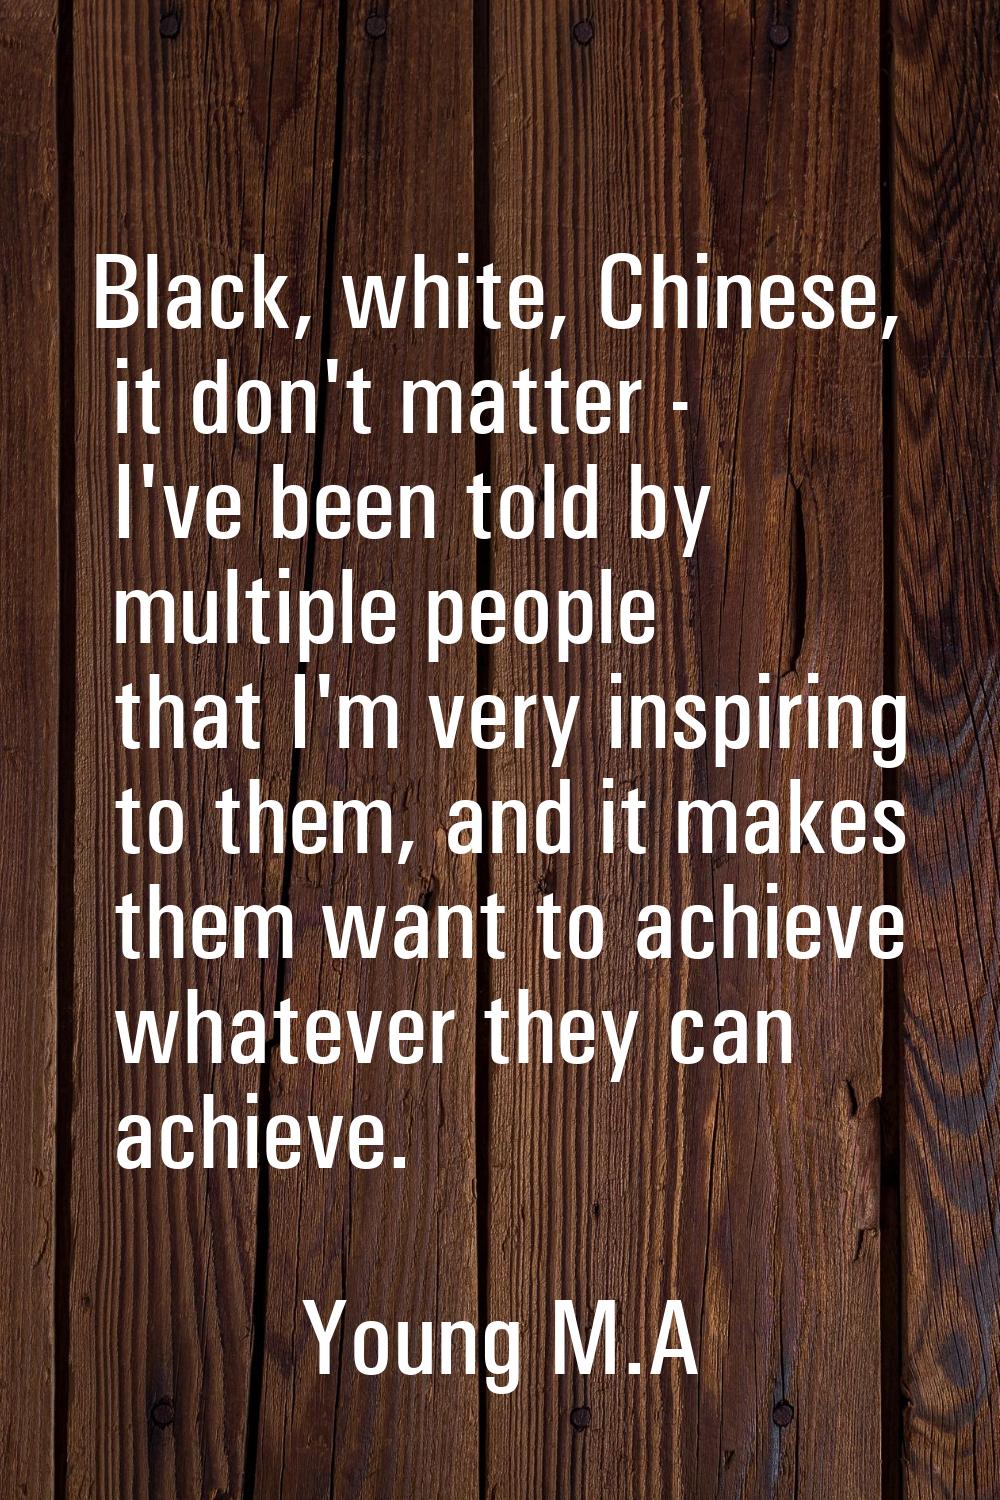 Black, white, Chinese, it don't matter - I've been told by multiple people that I'm very inspiring 